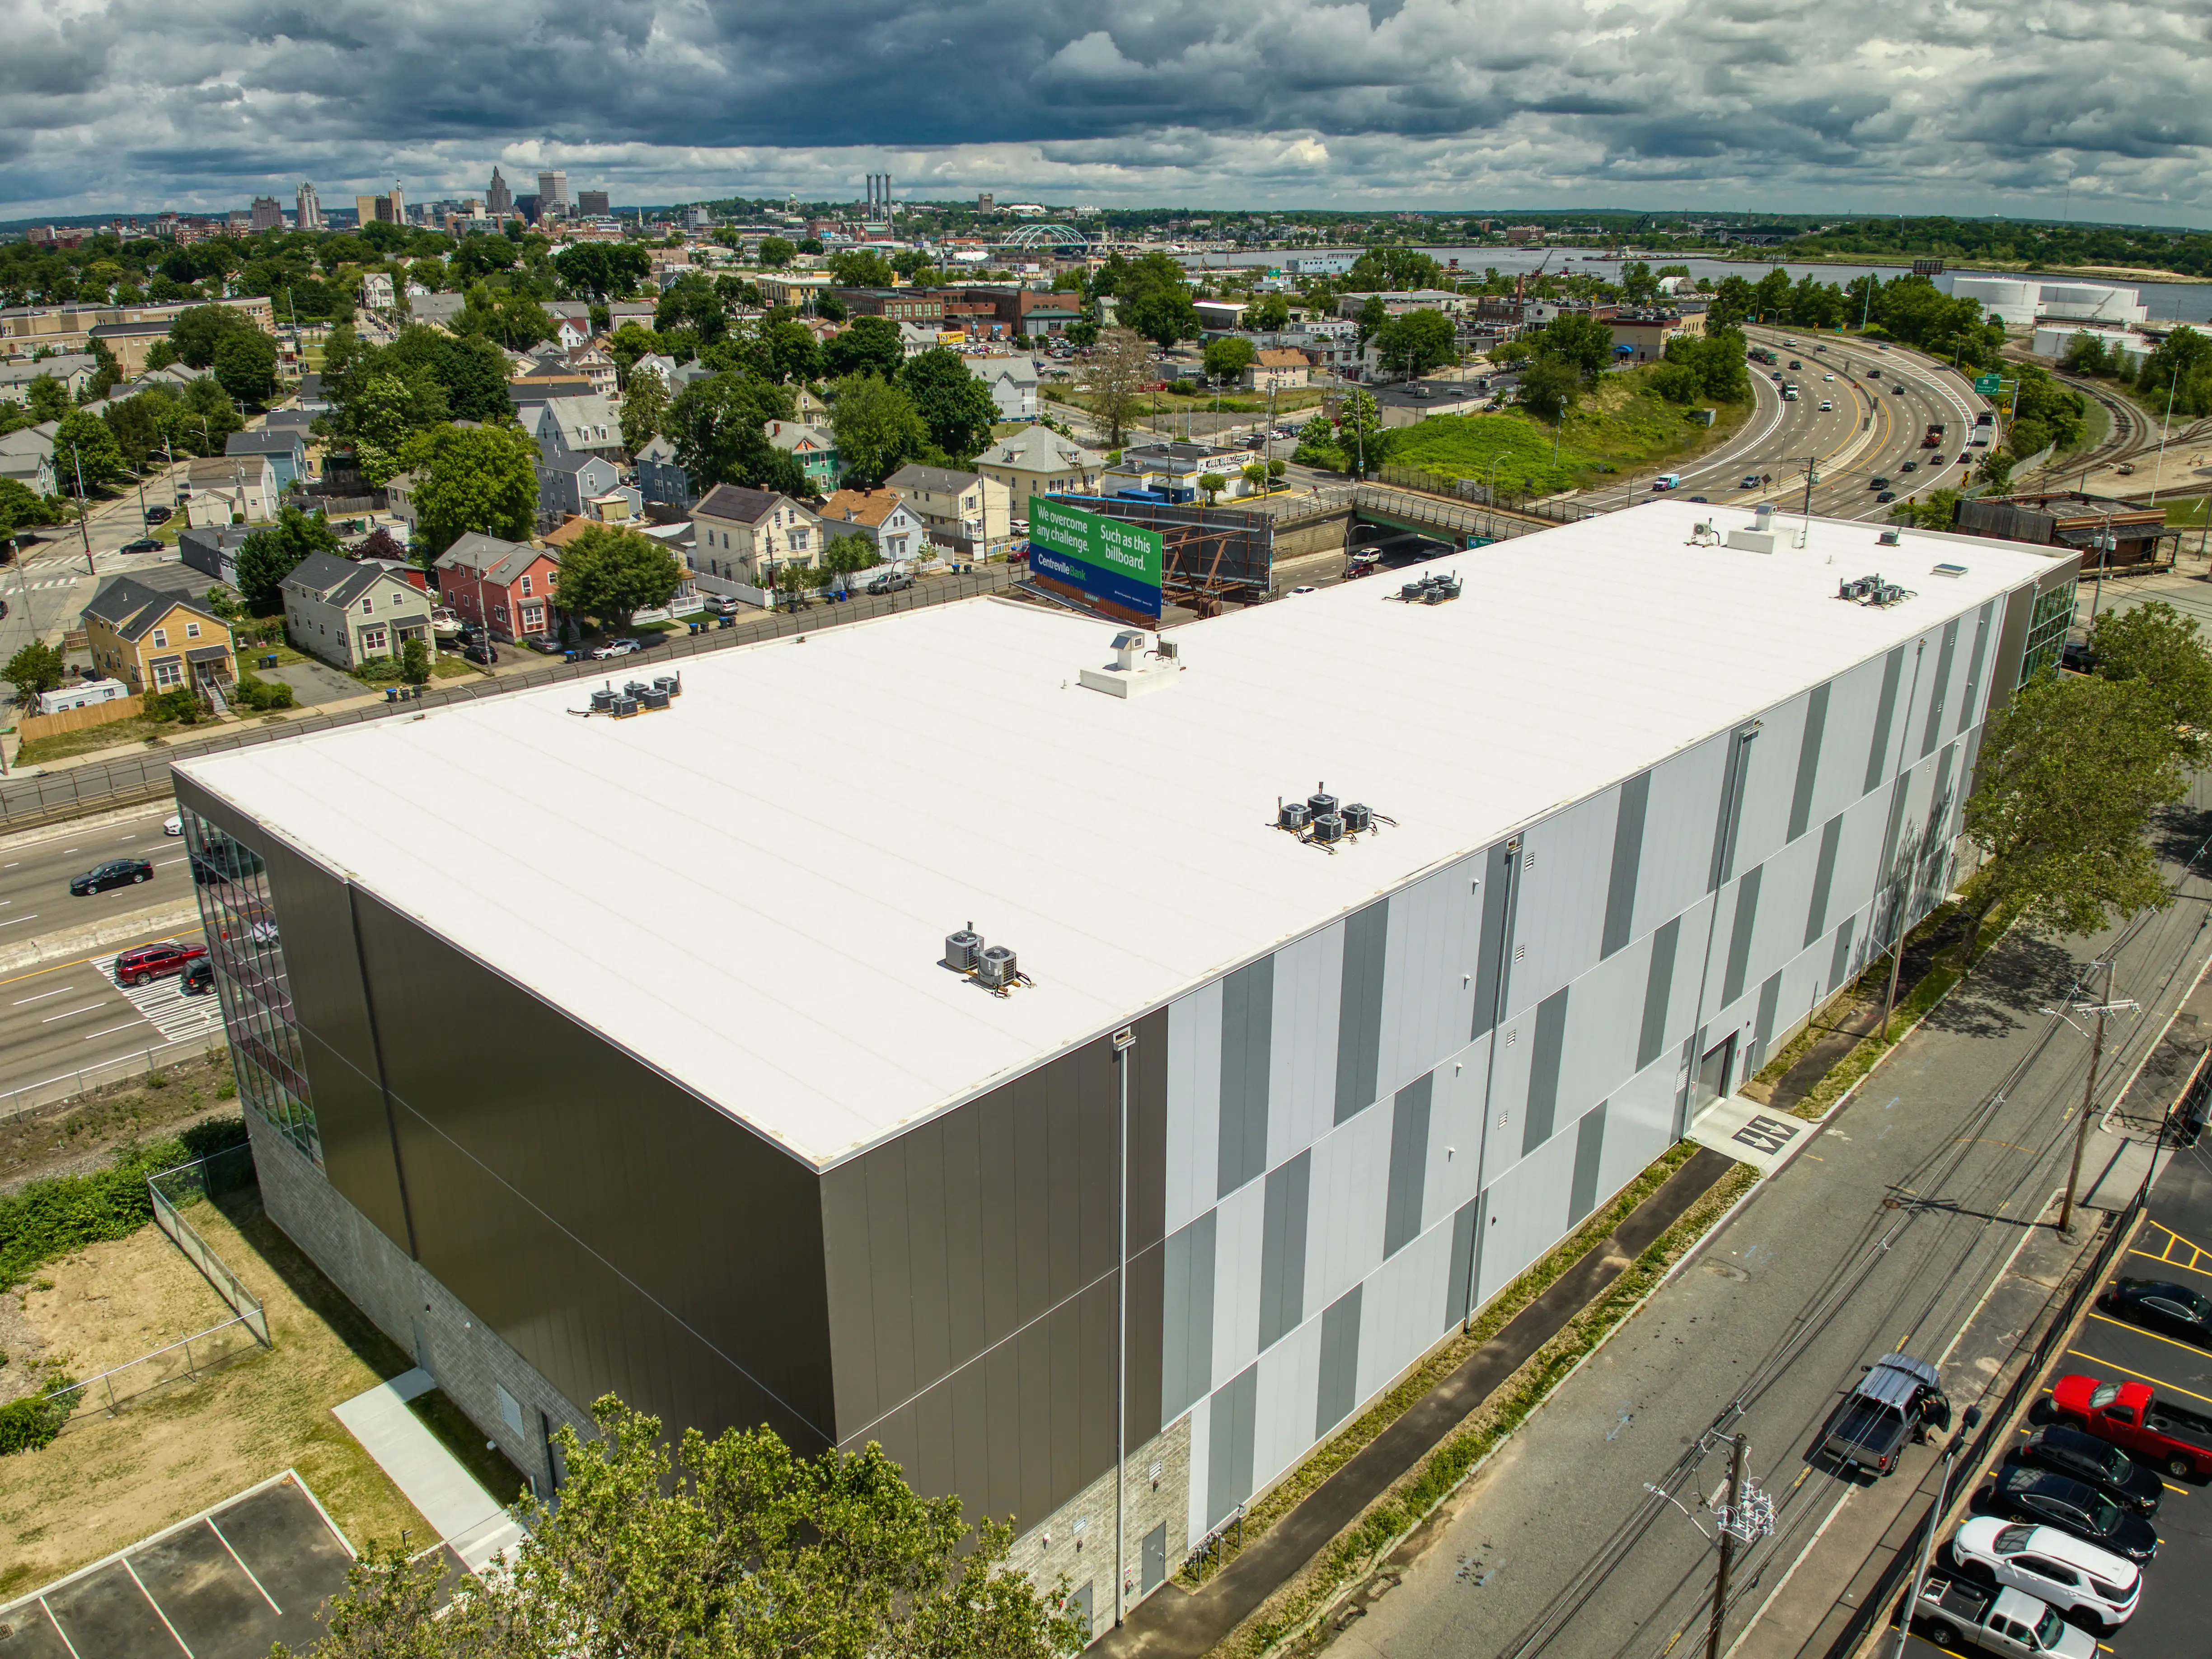 1117 Eddy Street Providence, RI - Self Storage Facility - commercial roofing project